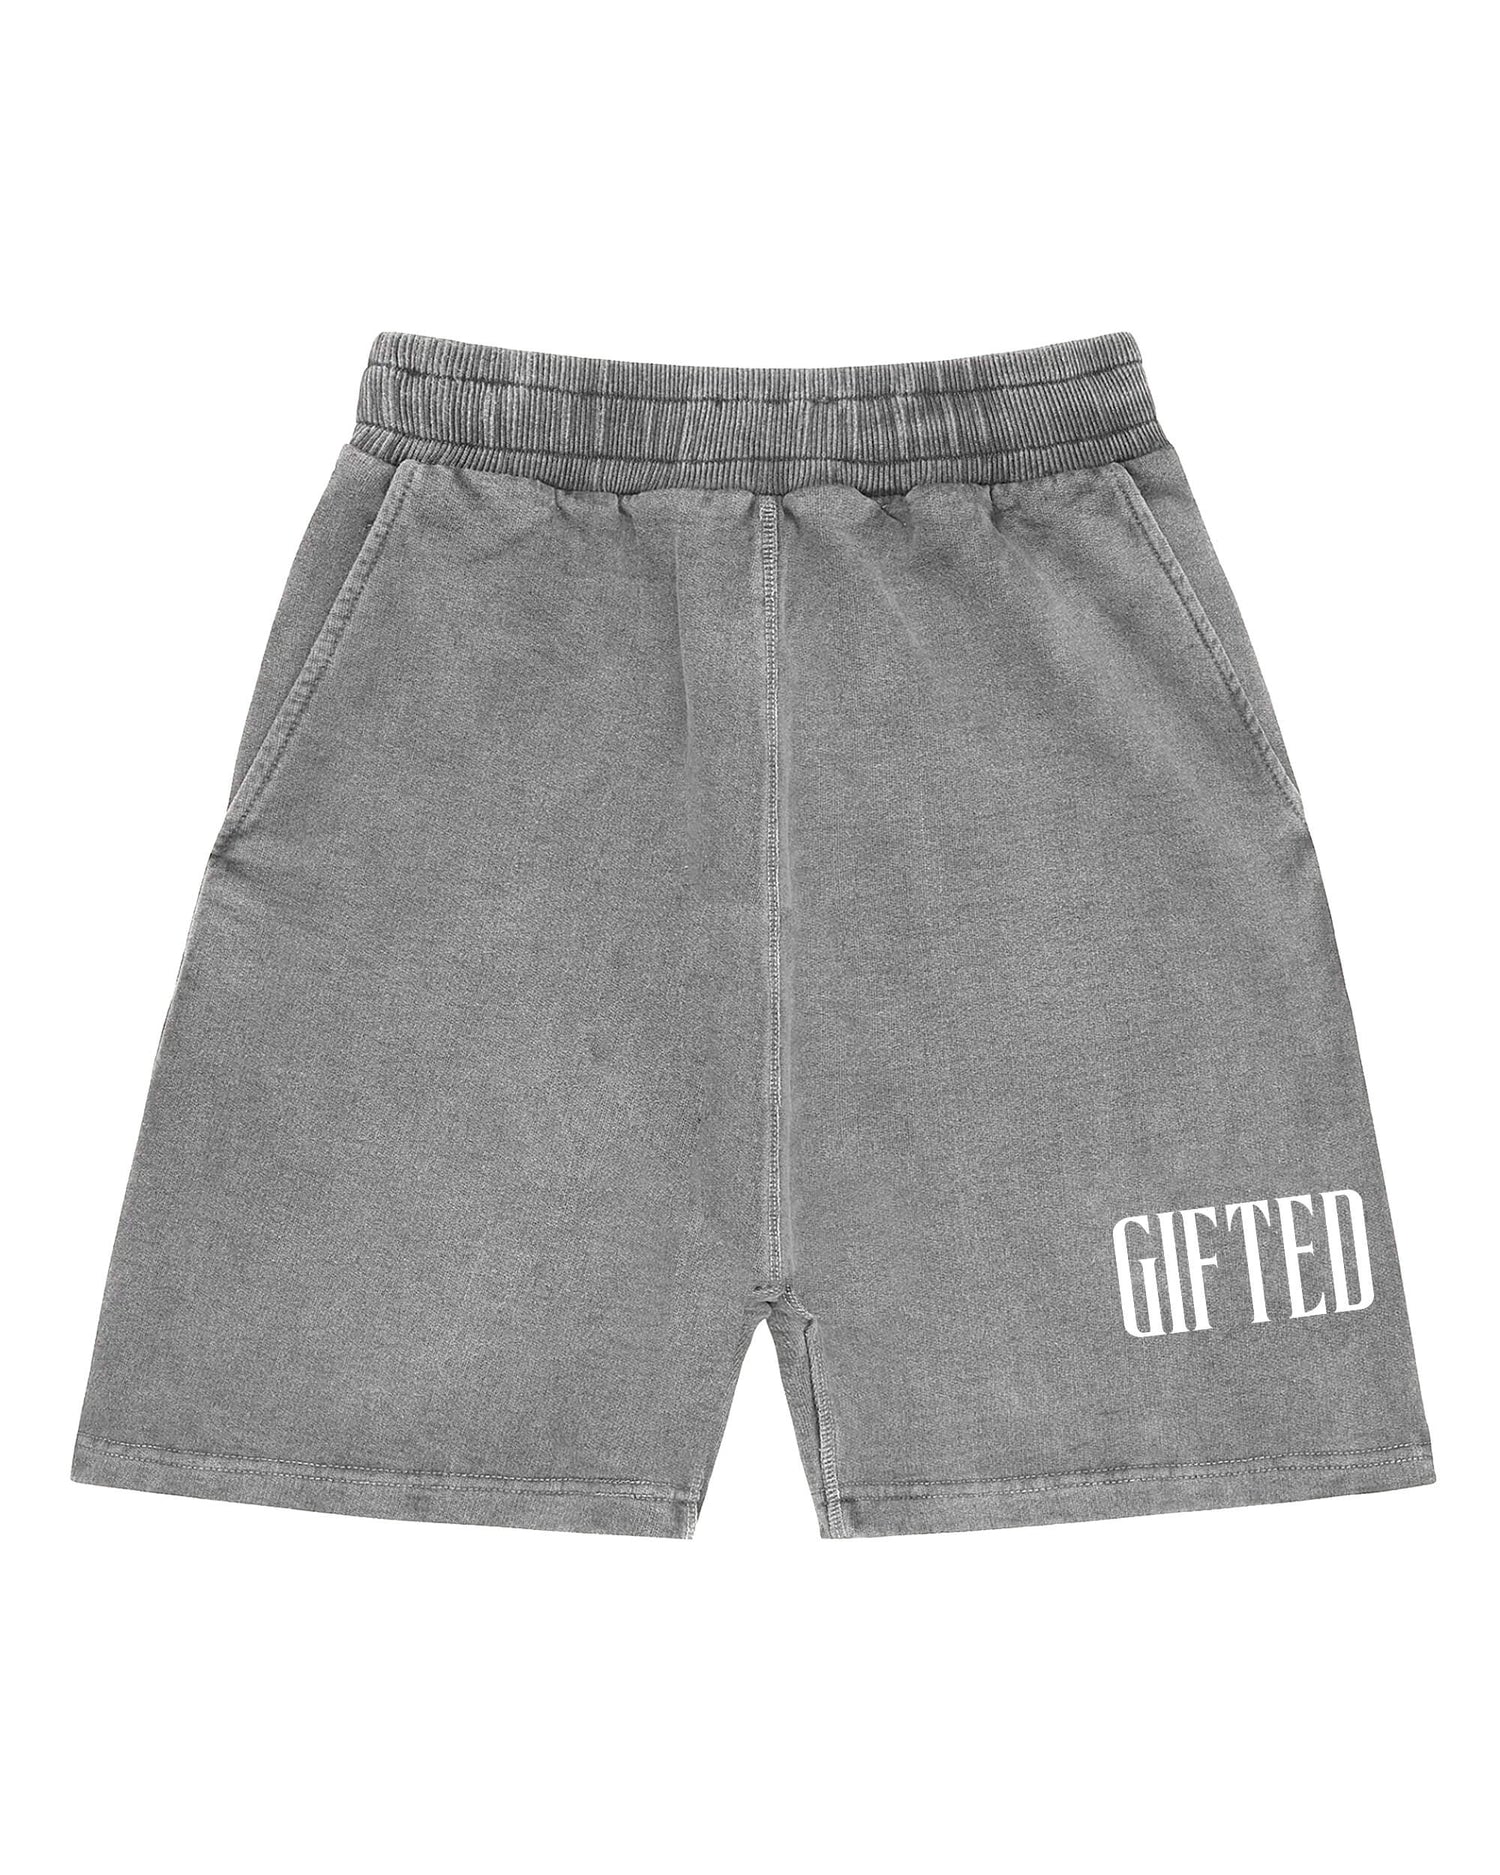 Gifted Shorts - Washed Charcoal